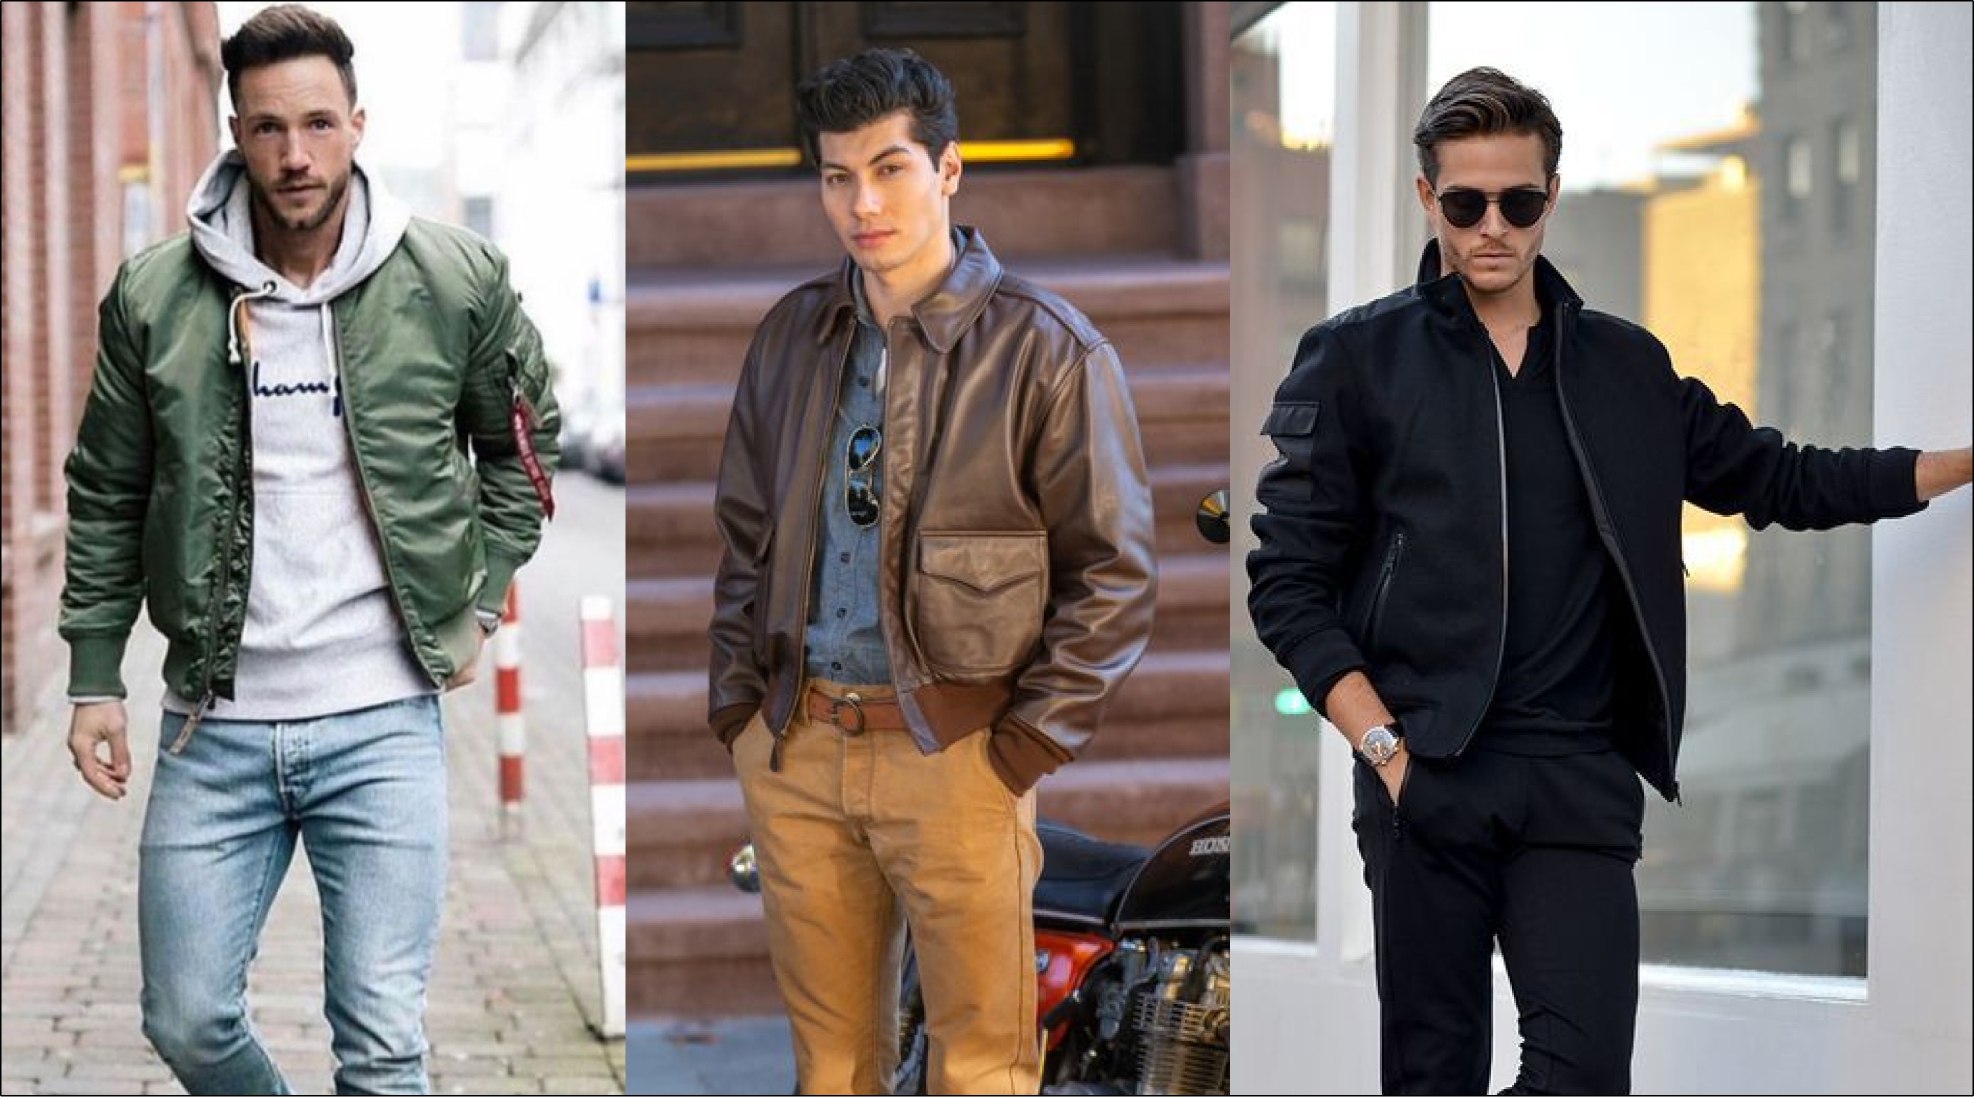 Bomber jackets for men are back (again.) –